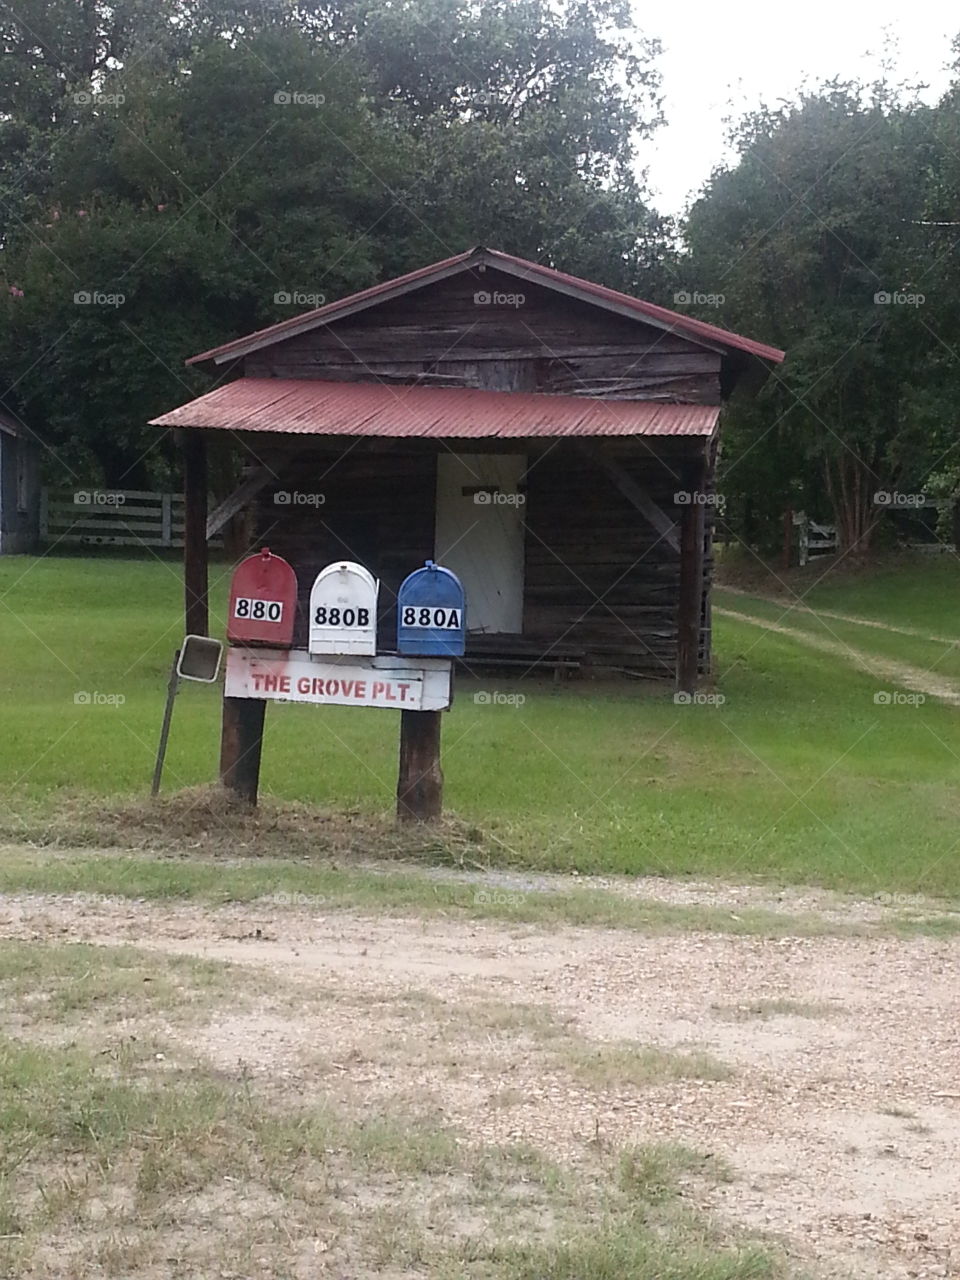 Old rural home. I saw this old home with the red, white and blue mailboxes in my way home from north Louisiana.